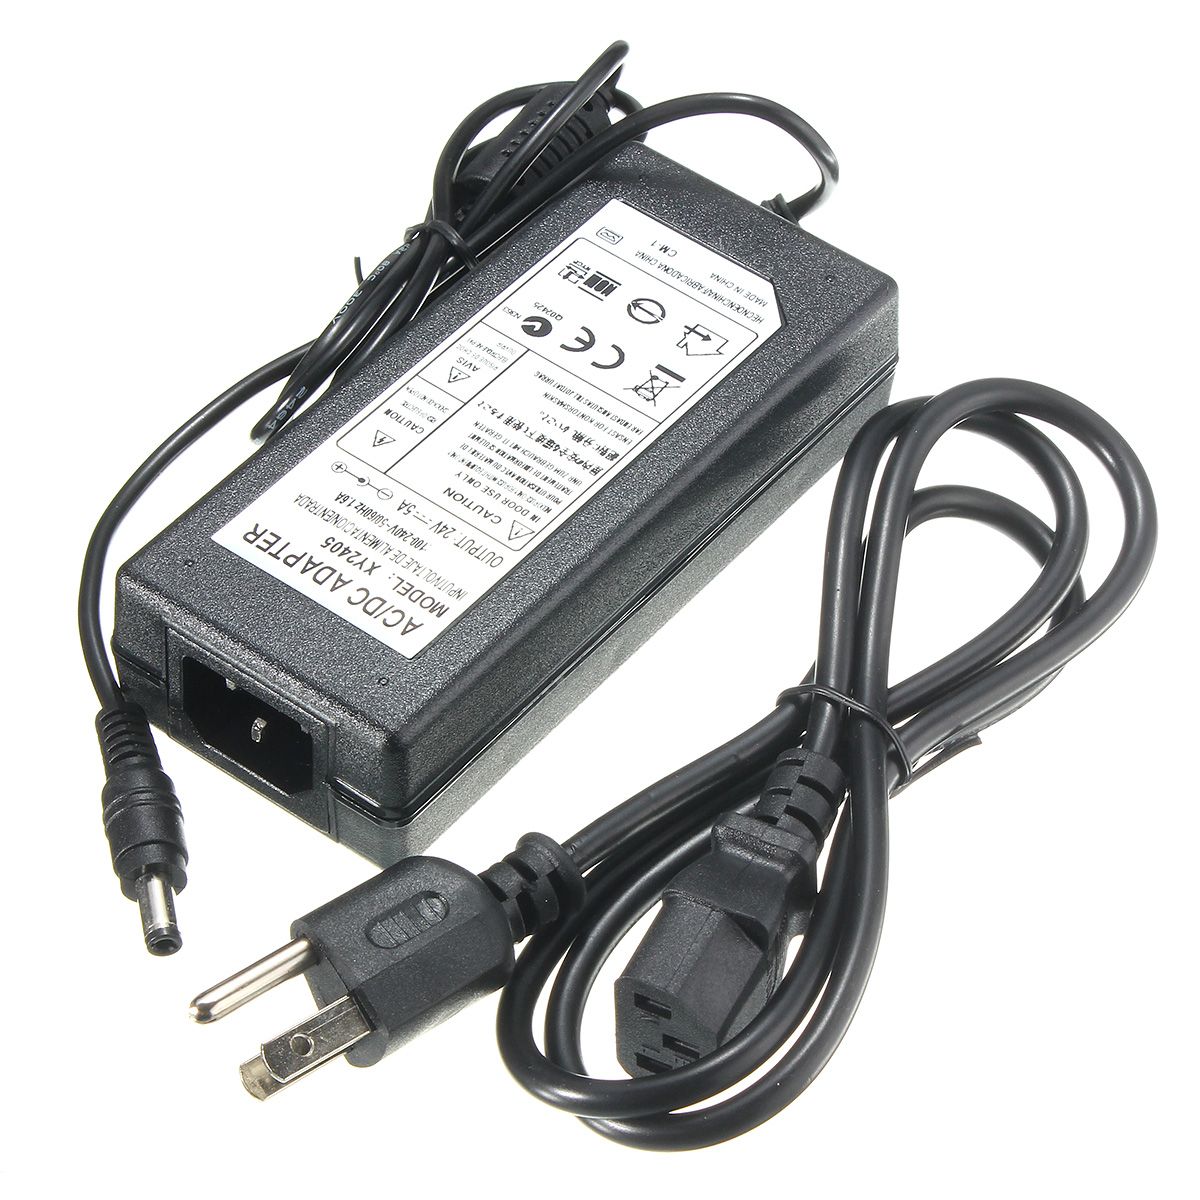 AC85-240V-to-DC24V-5A-Power-Supply-Adapter-Converter-with-5521mm-Connector-for-LED-Strip-1185515